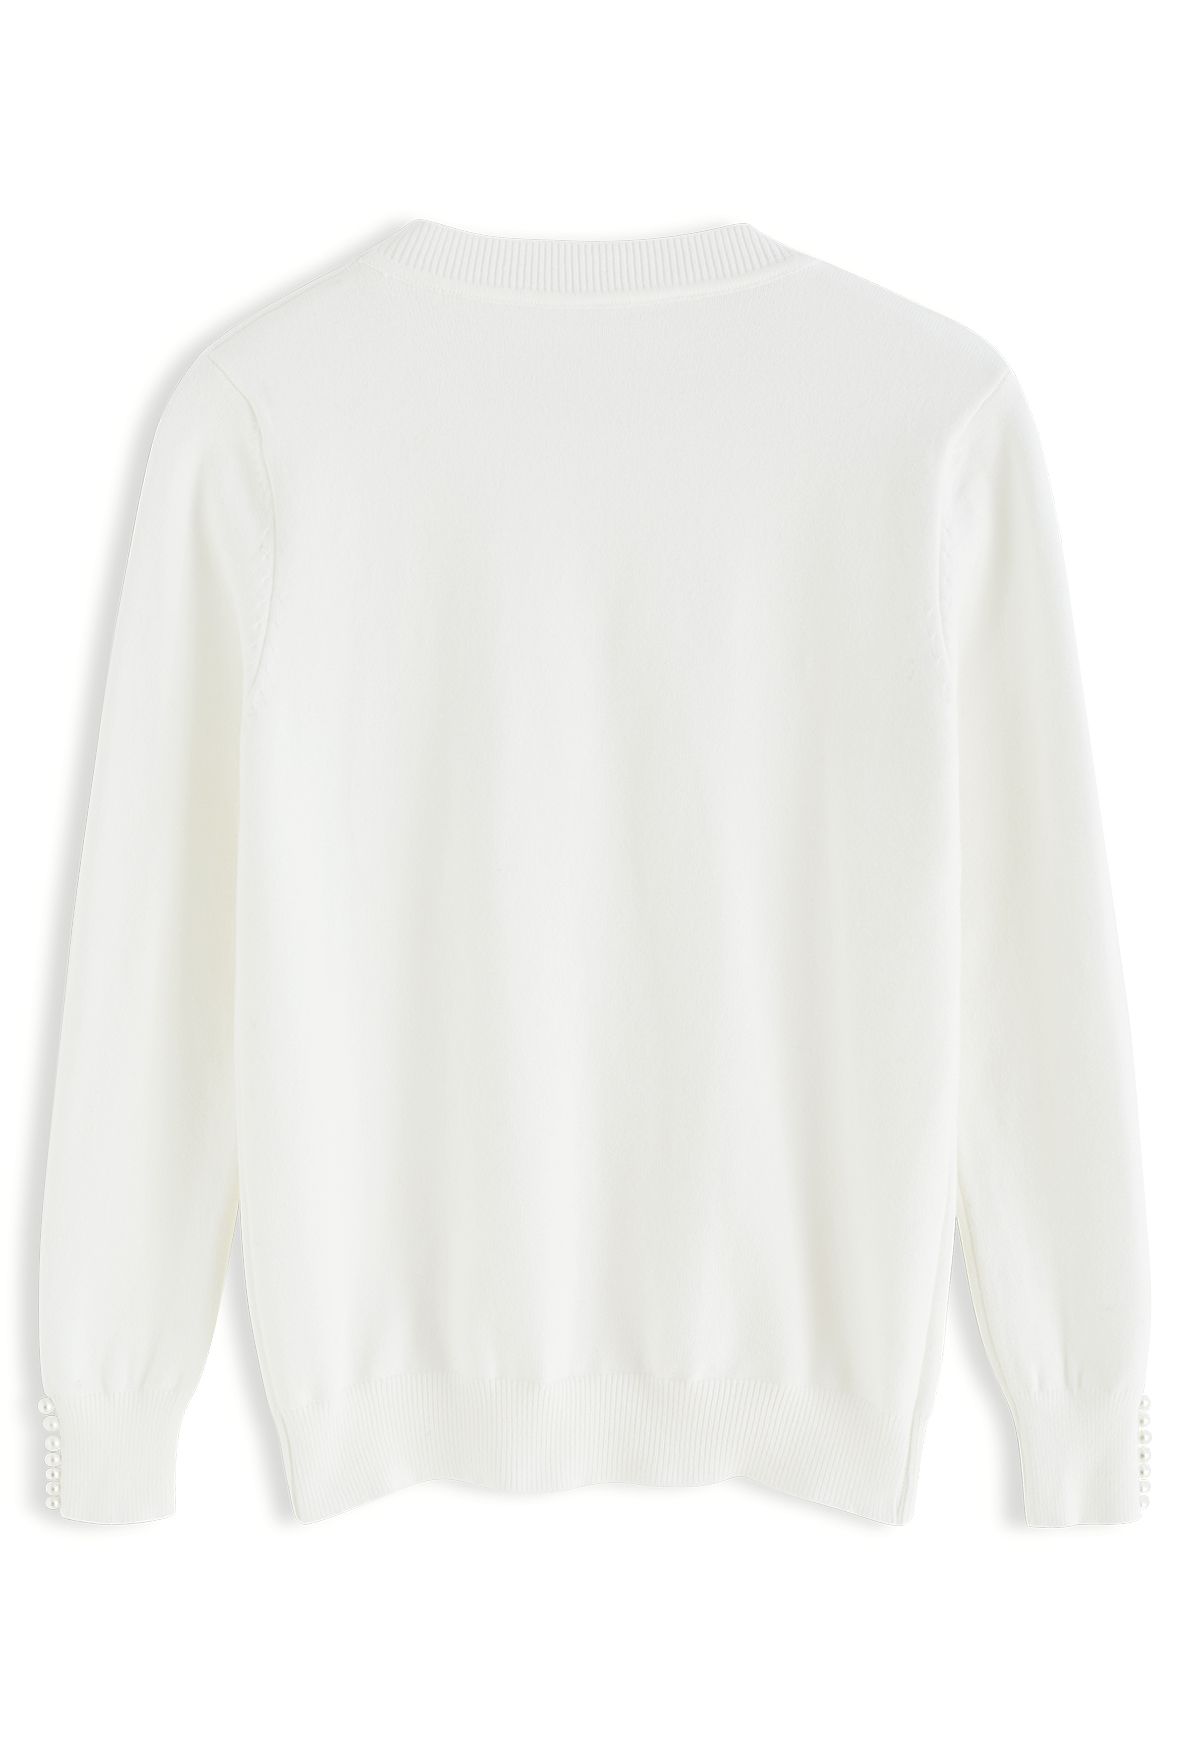 Pearl Trimmed Soft Knit Top in White - Retro, Indie and Unique Fashion